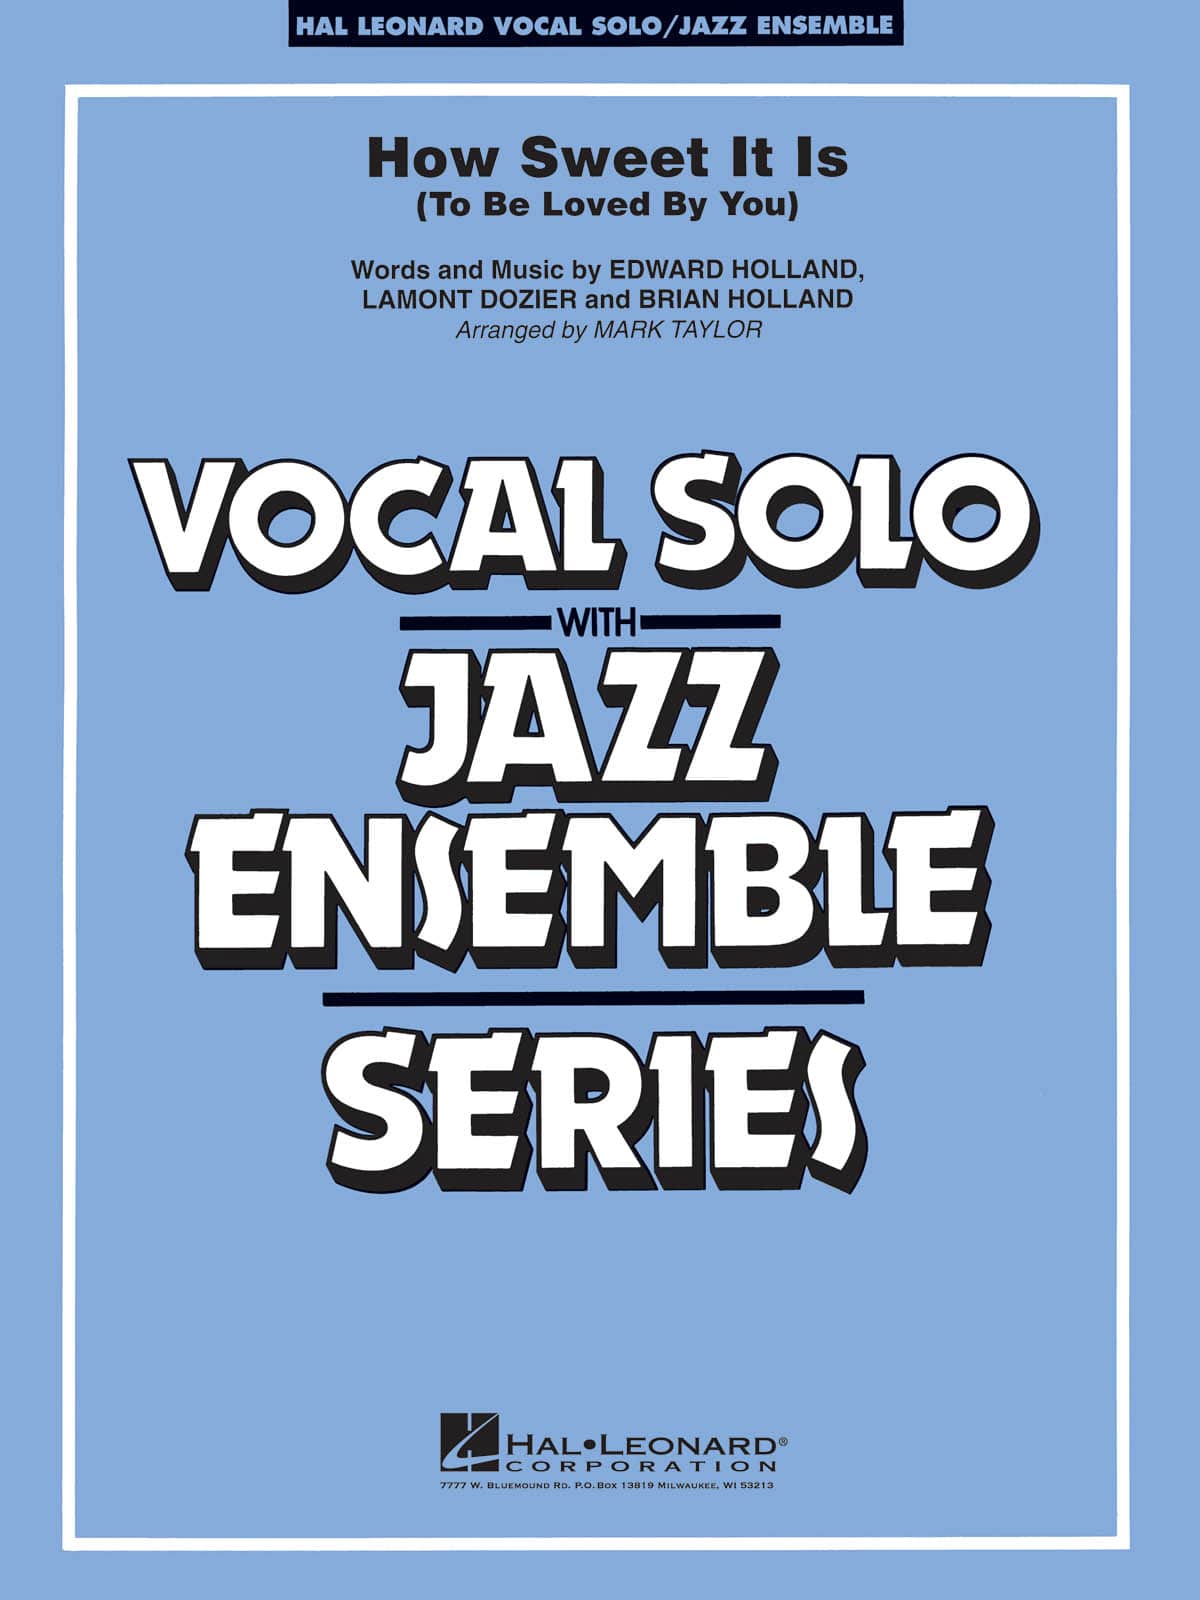 HAL LEONARD HOW SWEET IT IS TO BE LOVED BY YOU (ARR. MARK TAYLOR) - JAZZ ENSEMBLE SERIES 